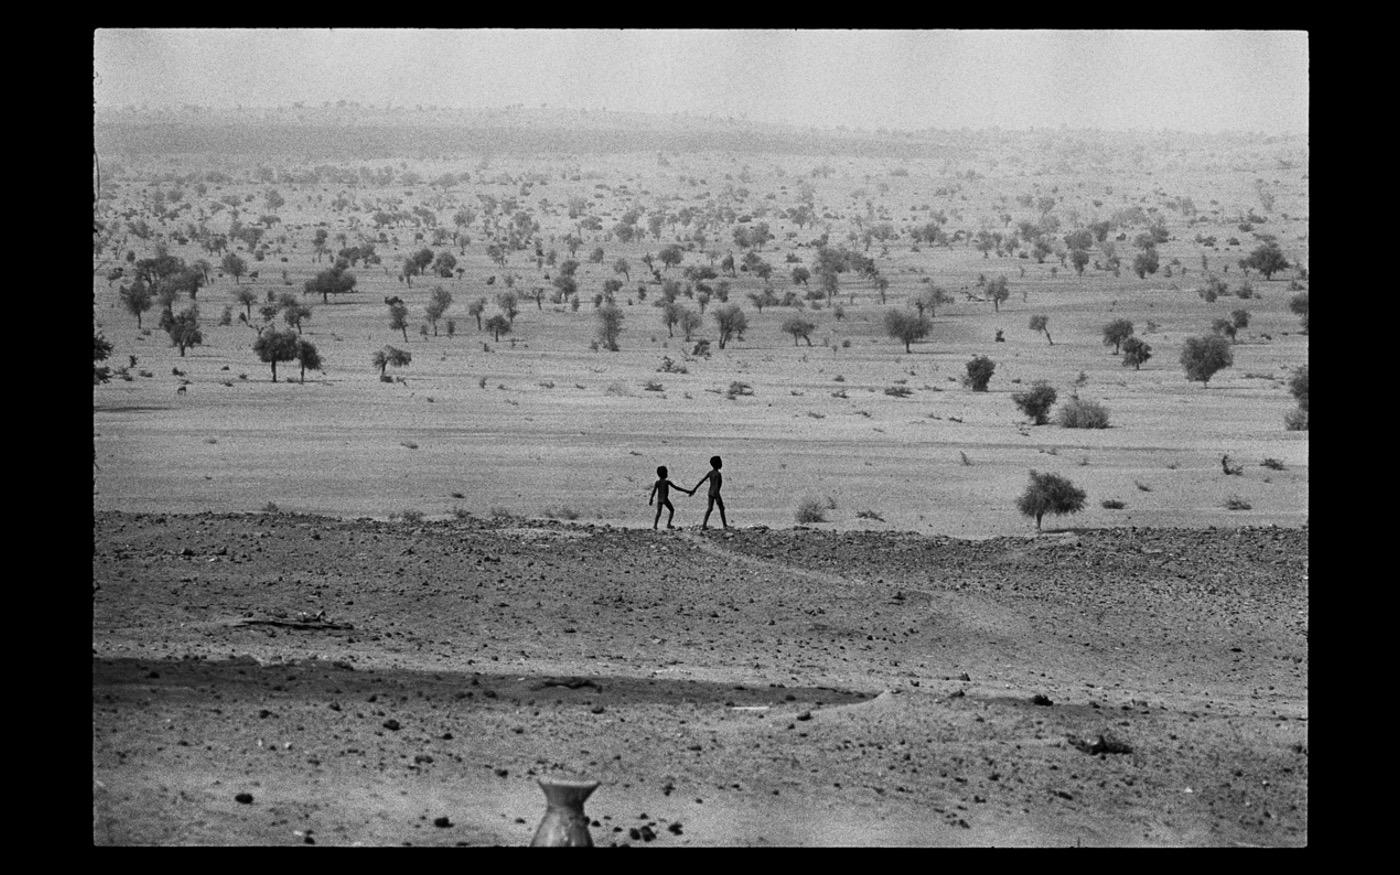 Two village children in the Niger bush, where drought created terrible living conditions in the sub-Sahara : Looking Back: 60 Years of Photographs : David Burnett | Photographer